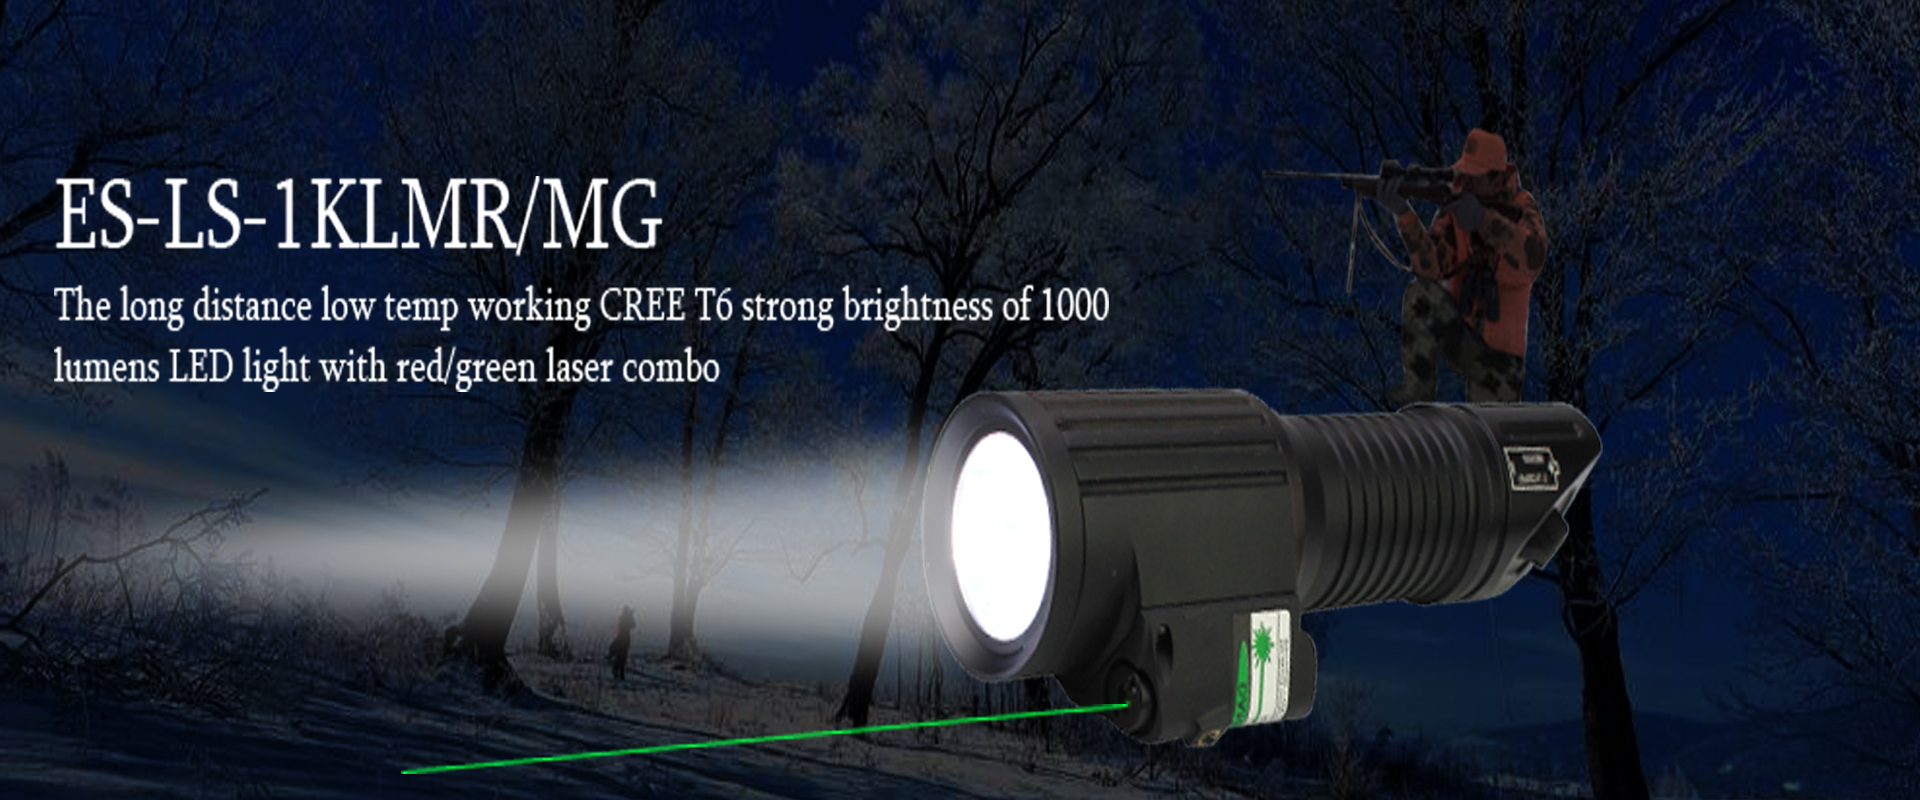 High brightness of 1000 lumens LED Flashlight with attached green laser, also varies of standard or compact LED light with laser combos for free selection.